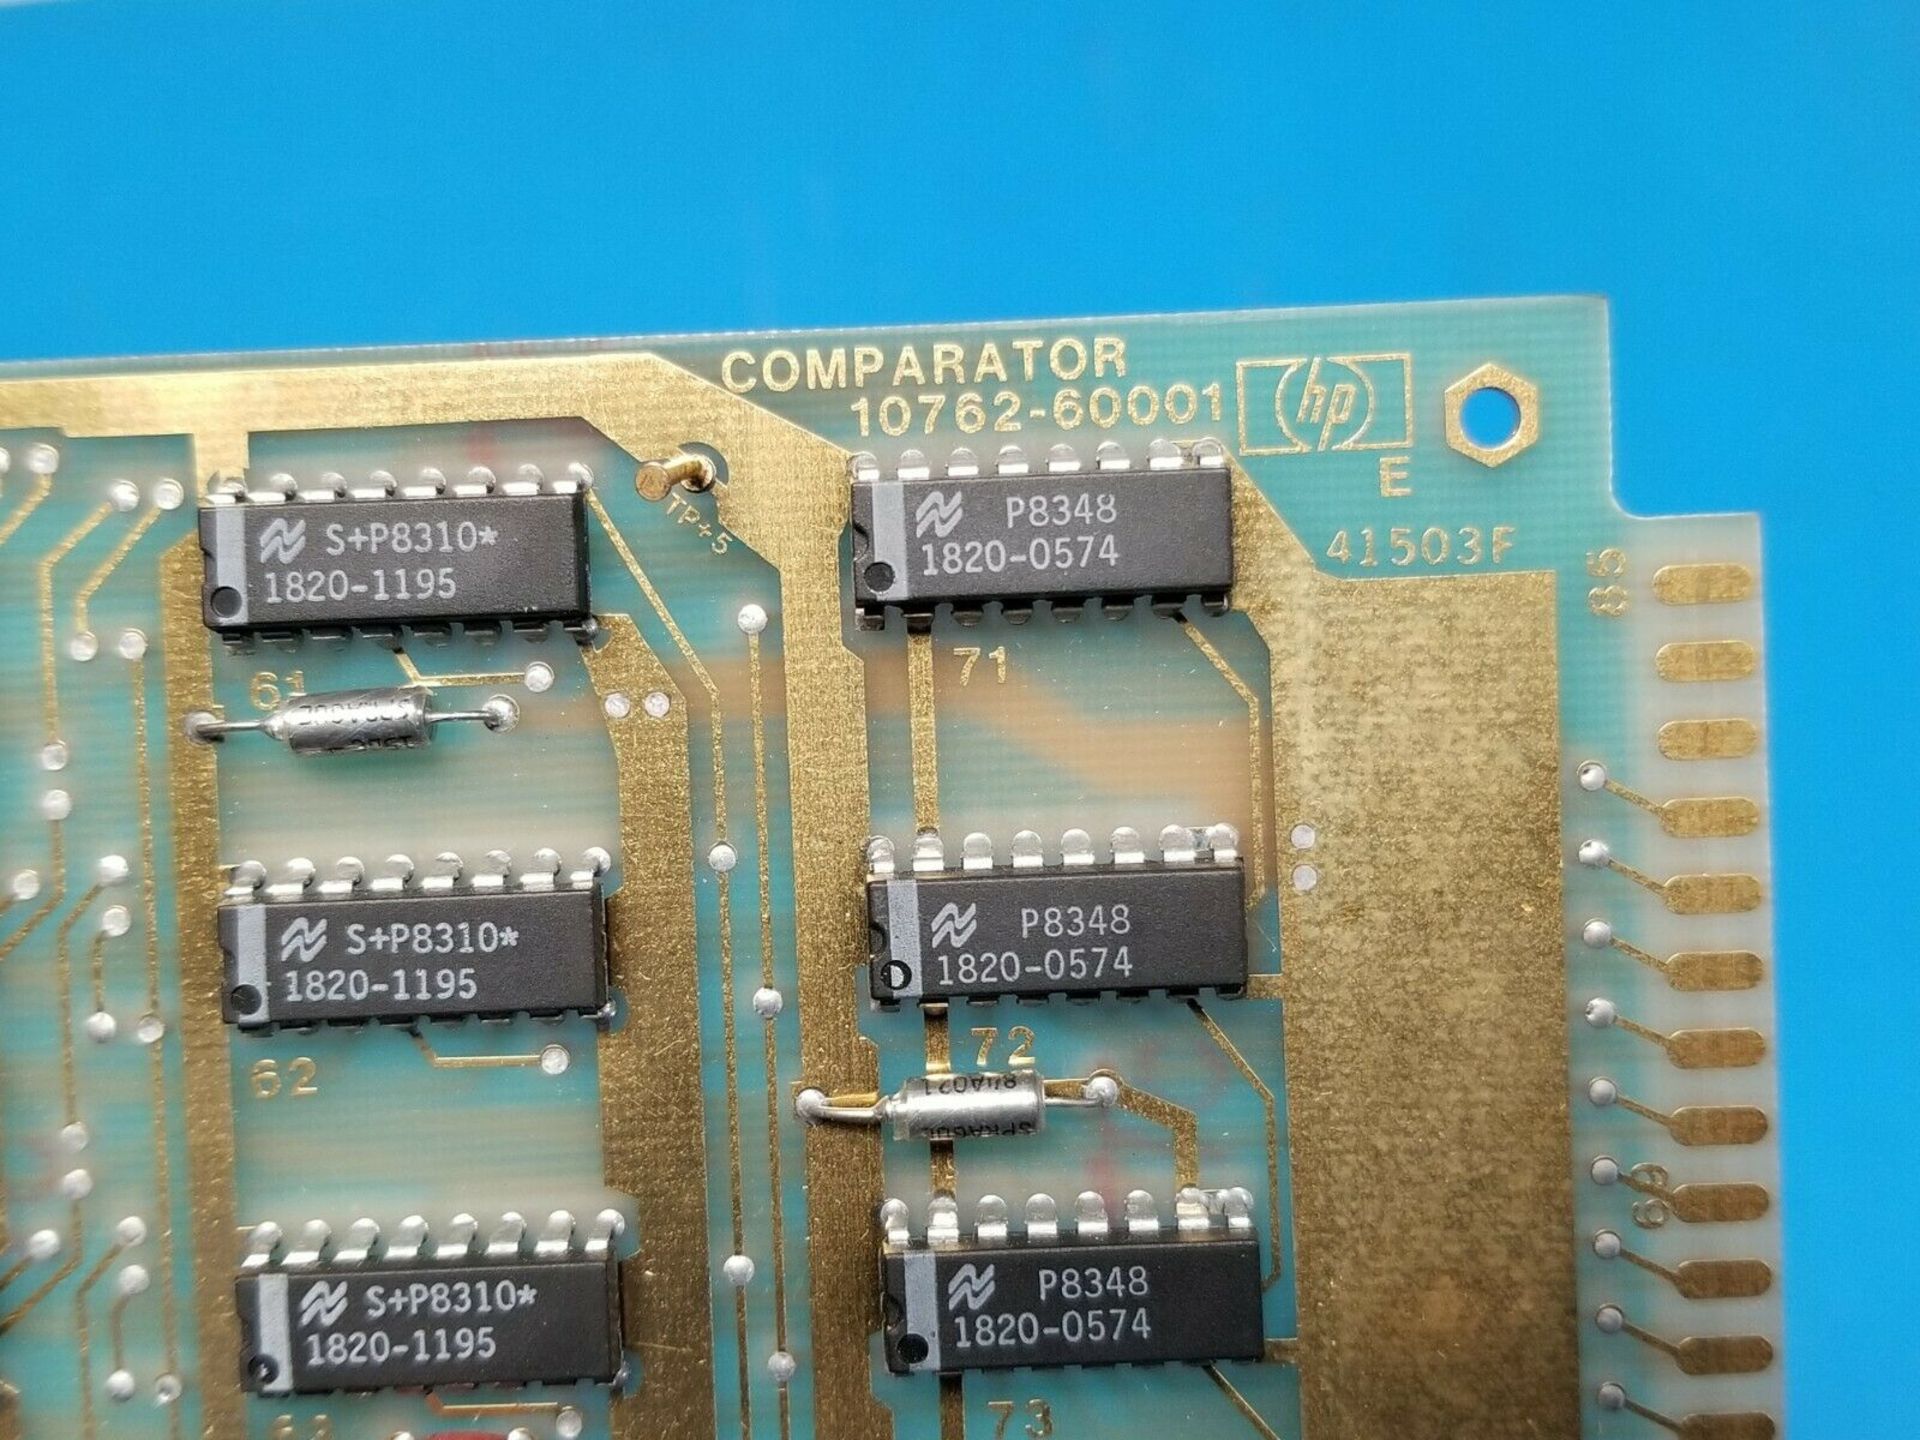 HP COMPARATOR BOARD FOR ULTRATECH STEPPER - Image 2 of 3